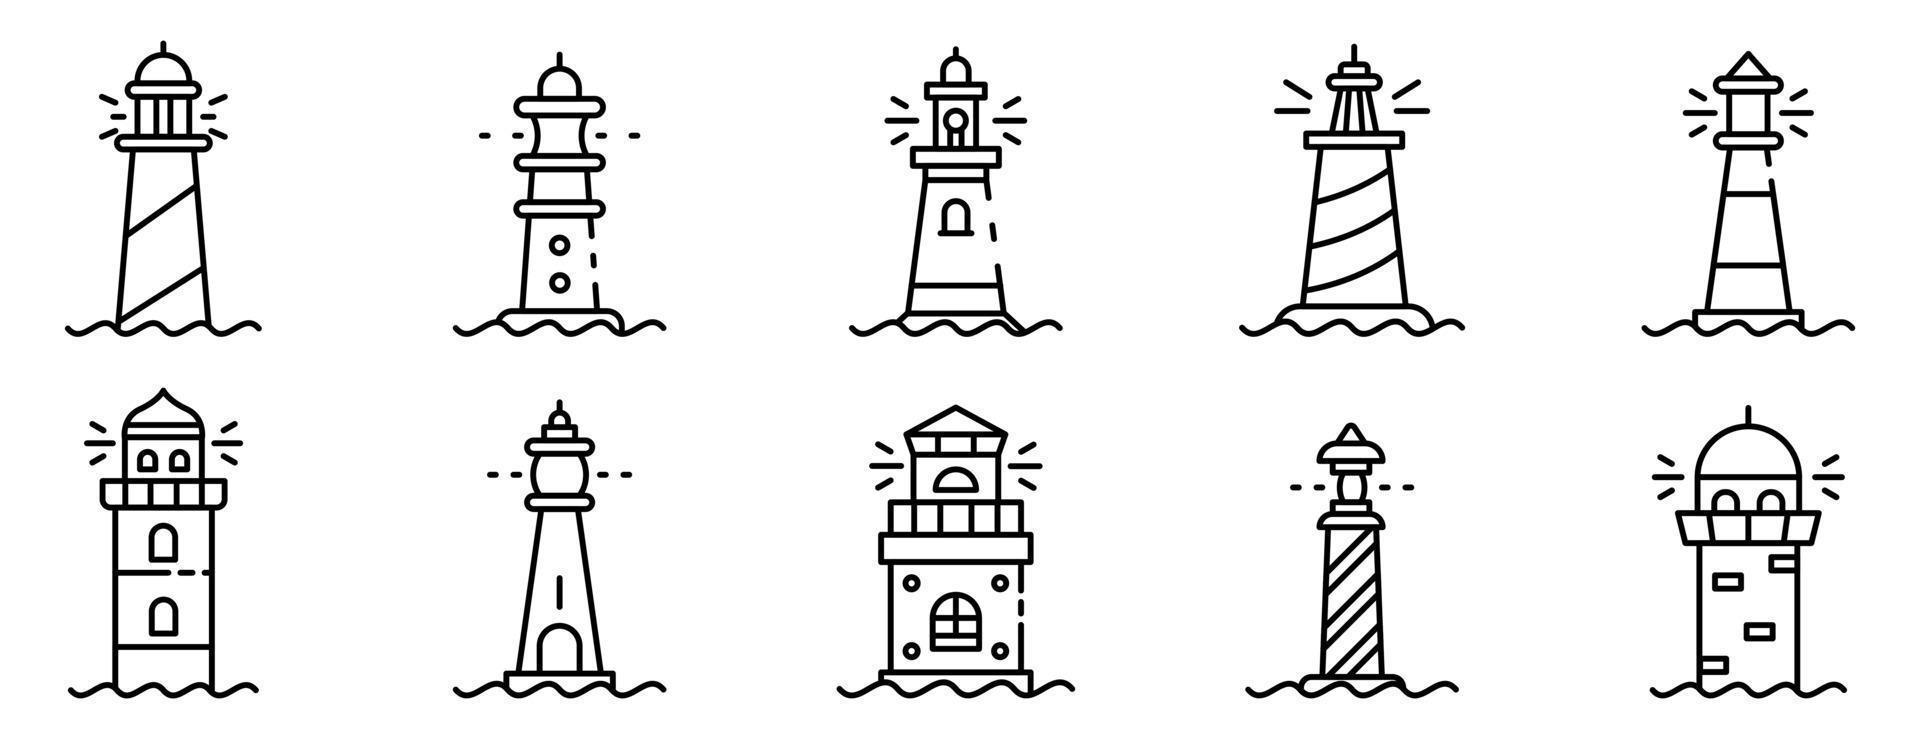 Lighthouse icons set, outline style vector